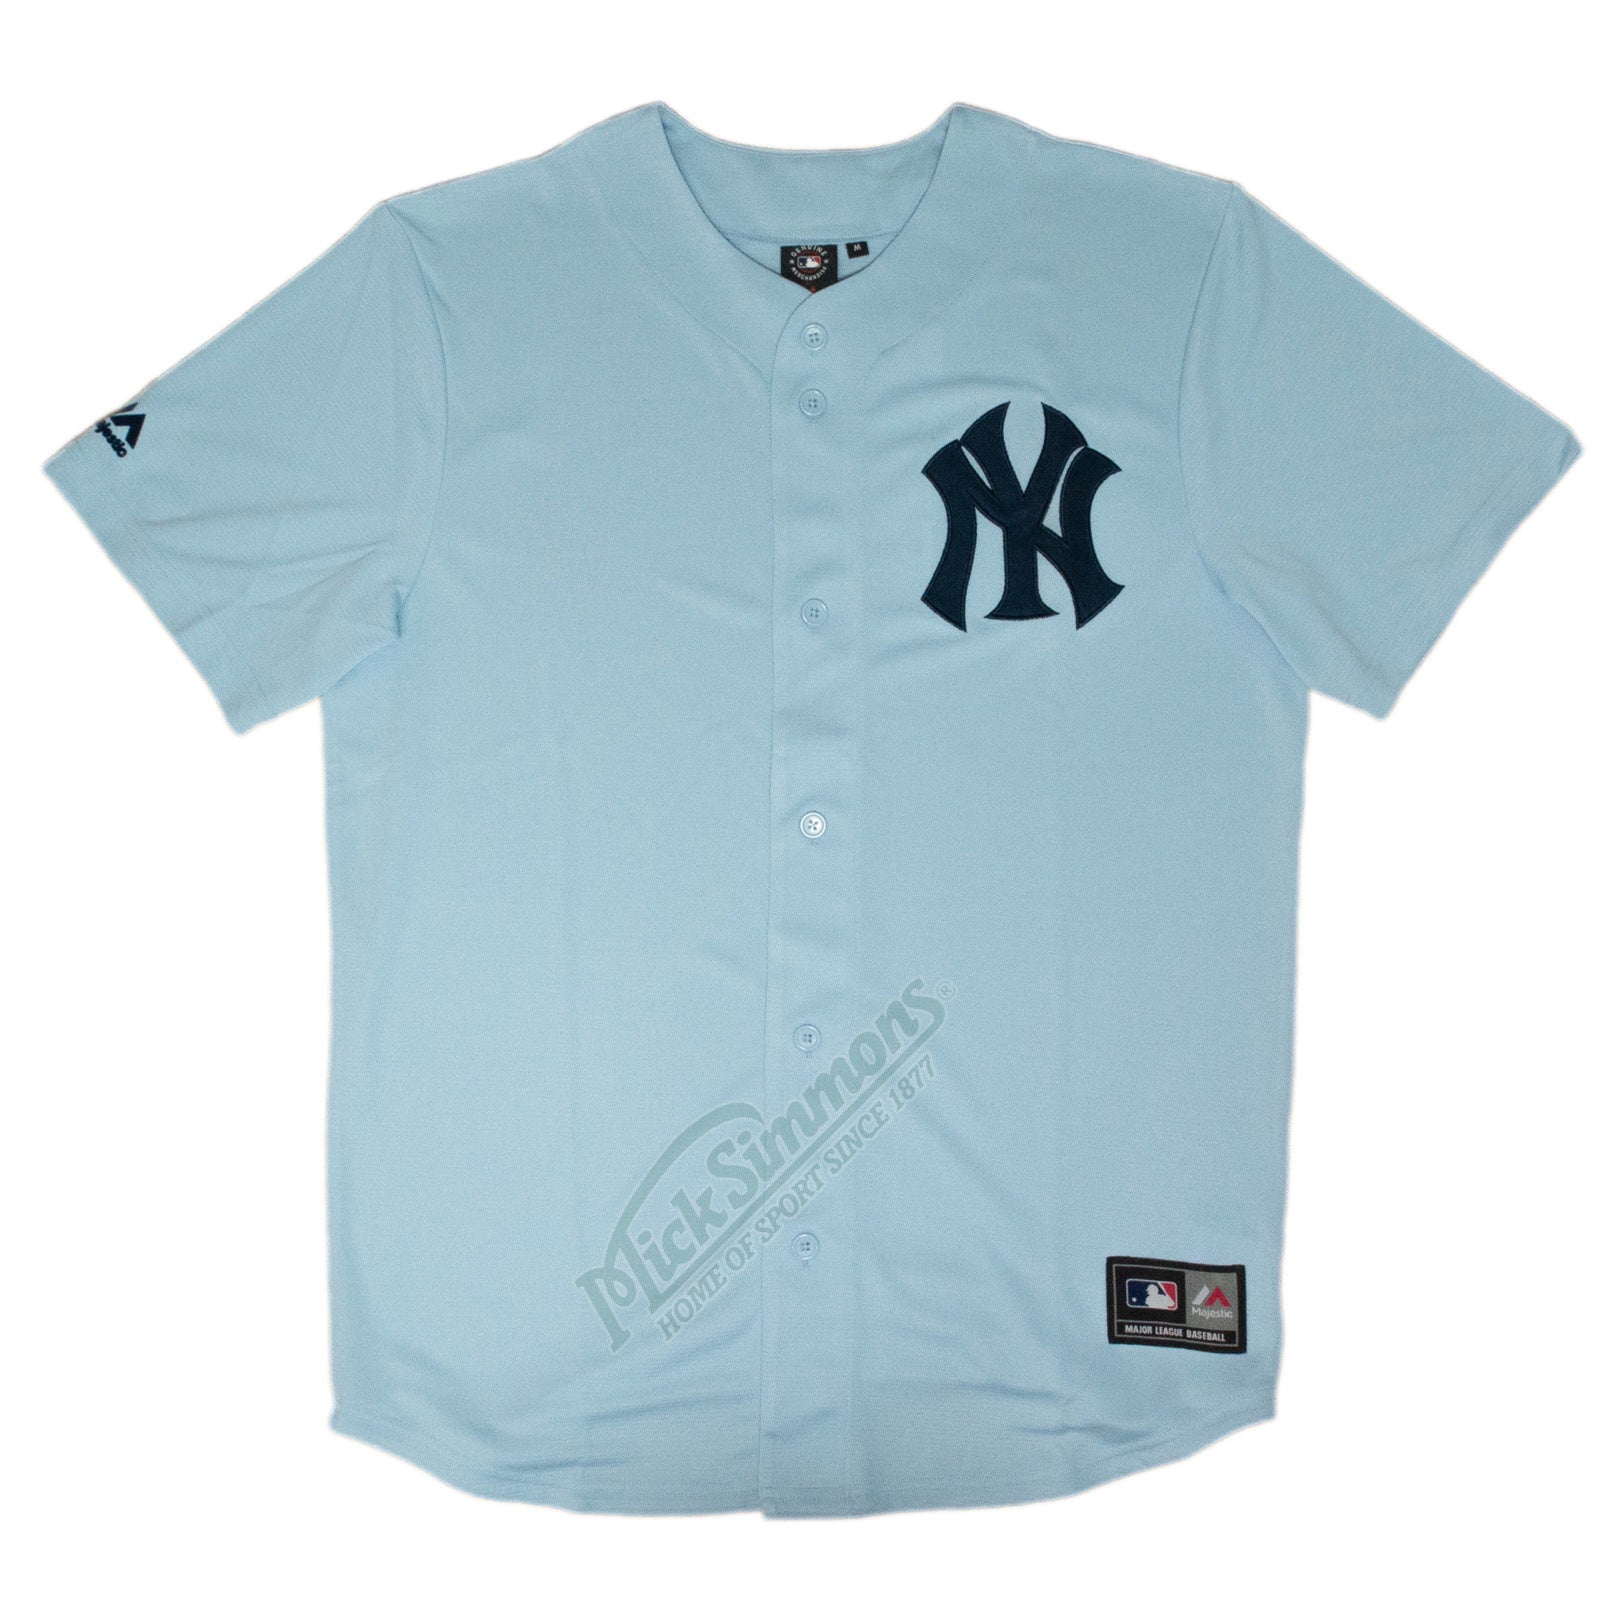 New York Yankees Vintage MLB Baseball Jersey by Majestic - Glacial Blue